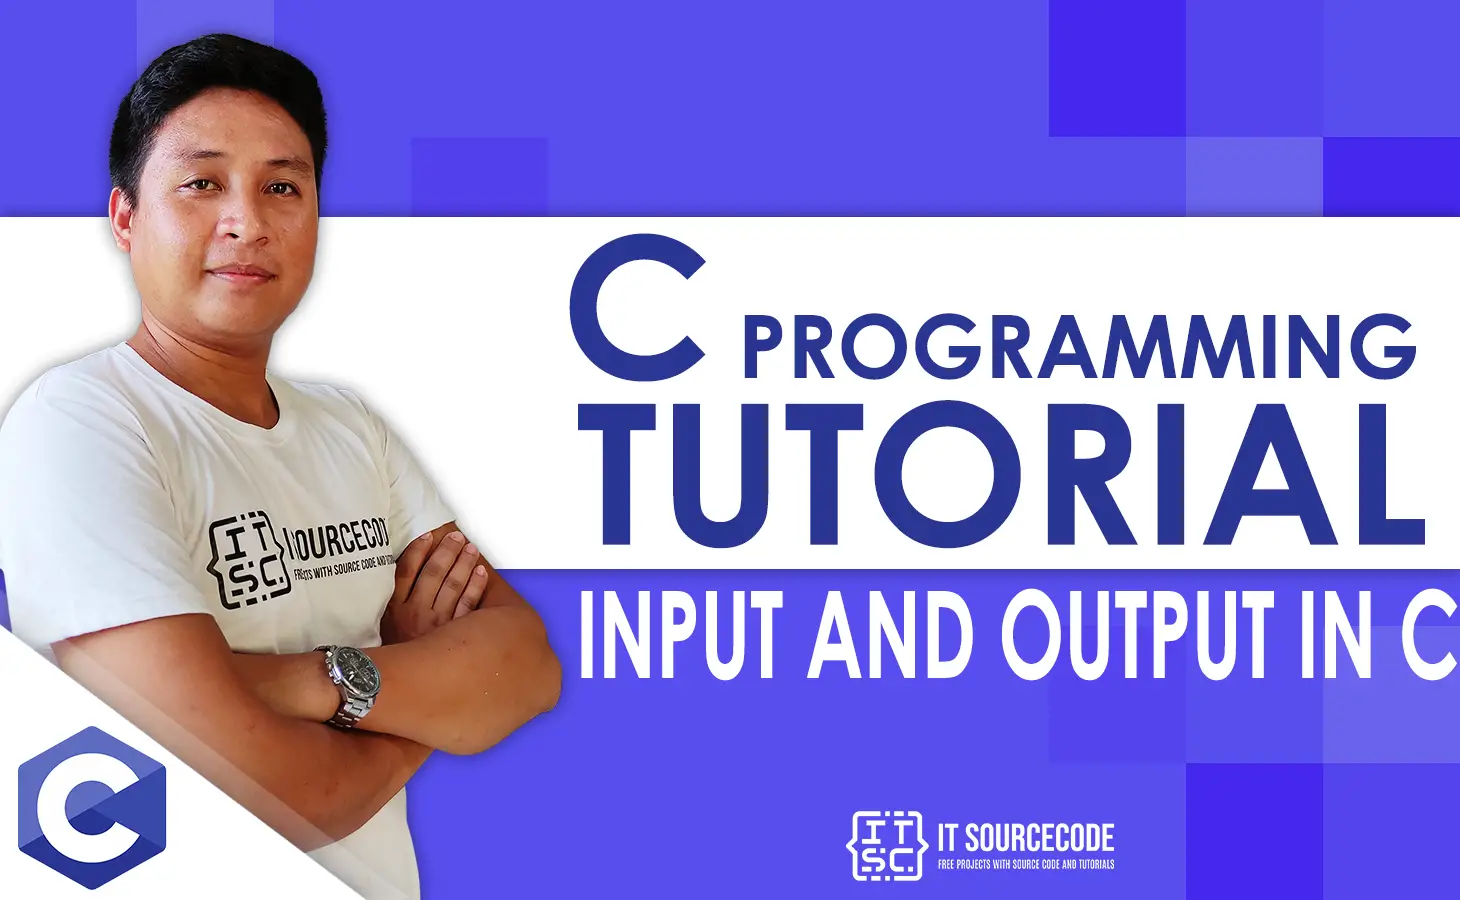 Input and output in C